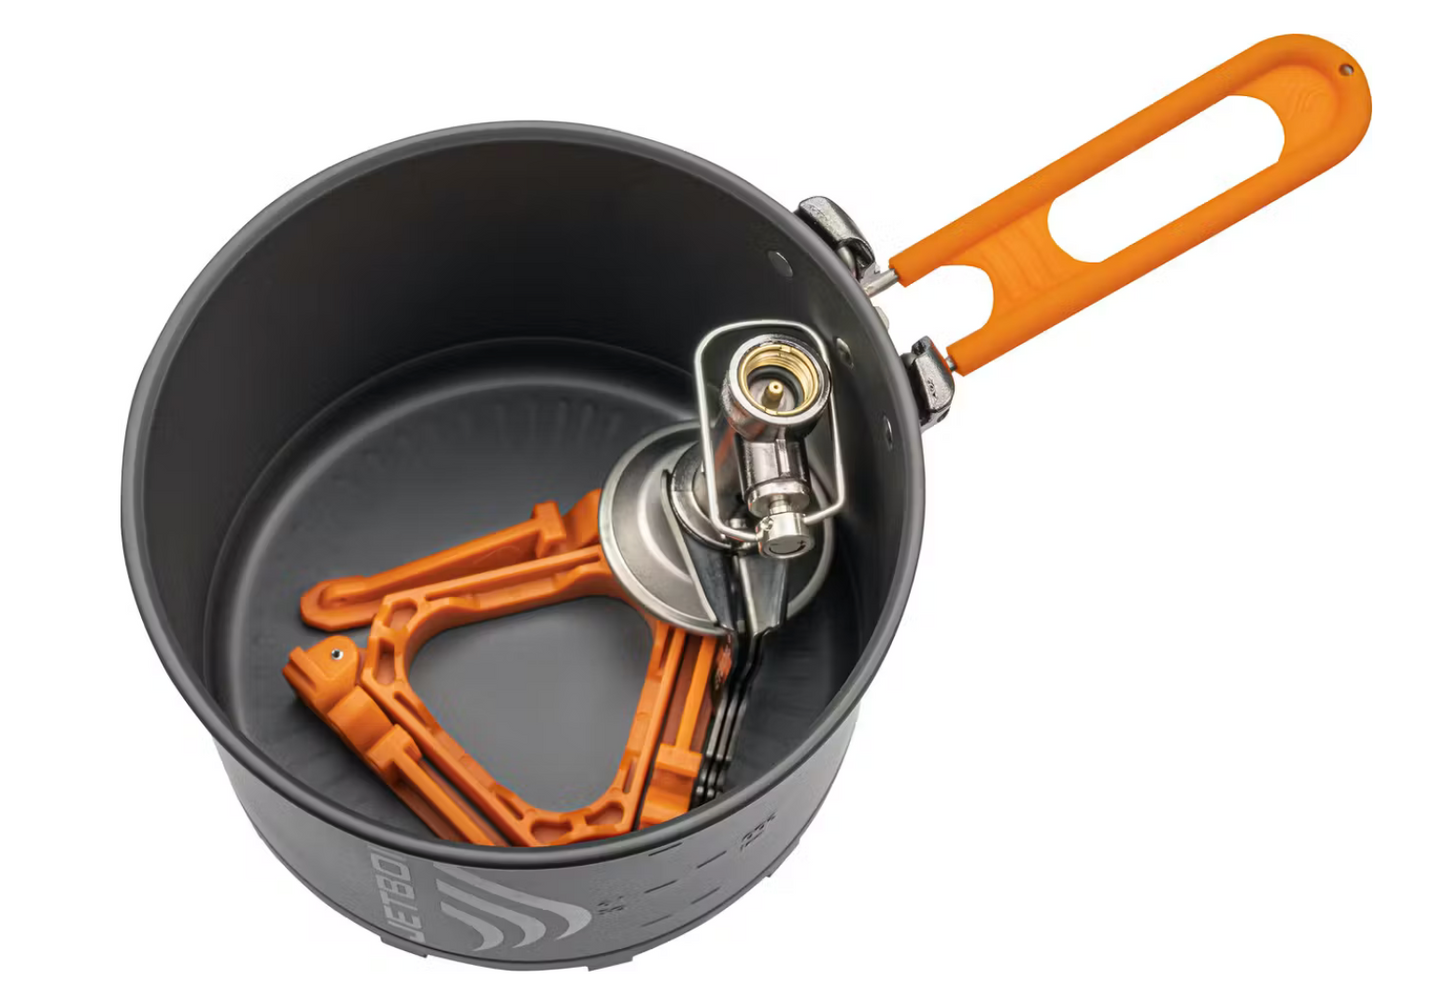 Jetboil - Stash Stove Cooking System